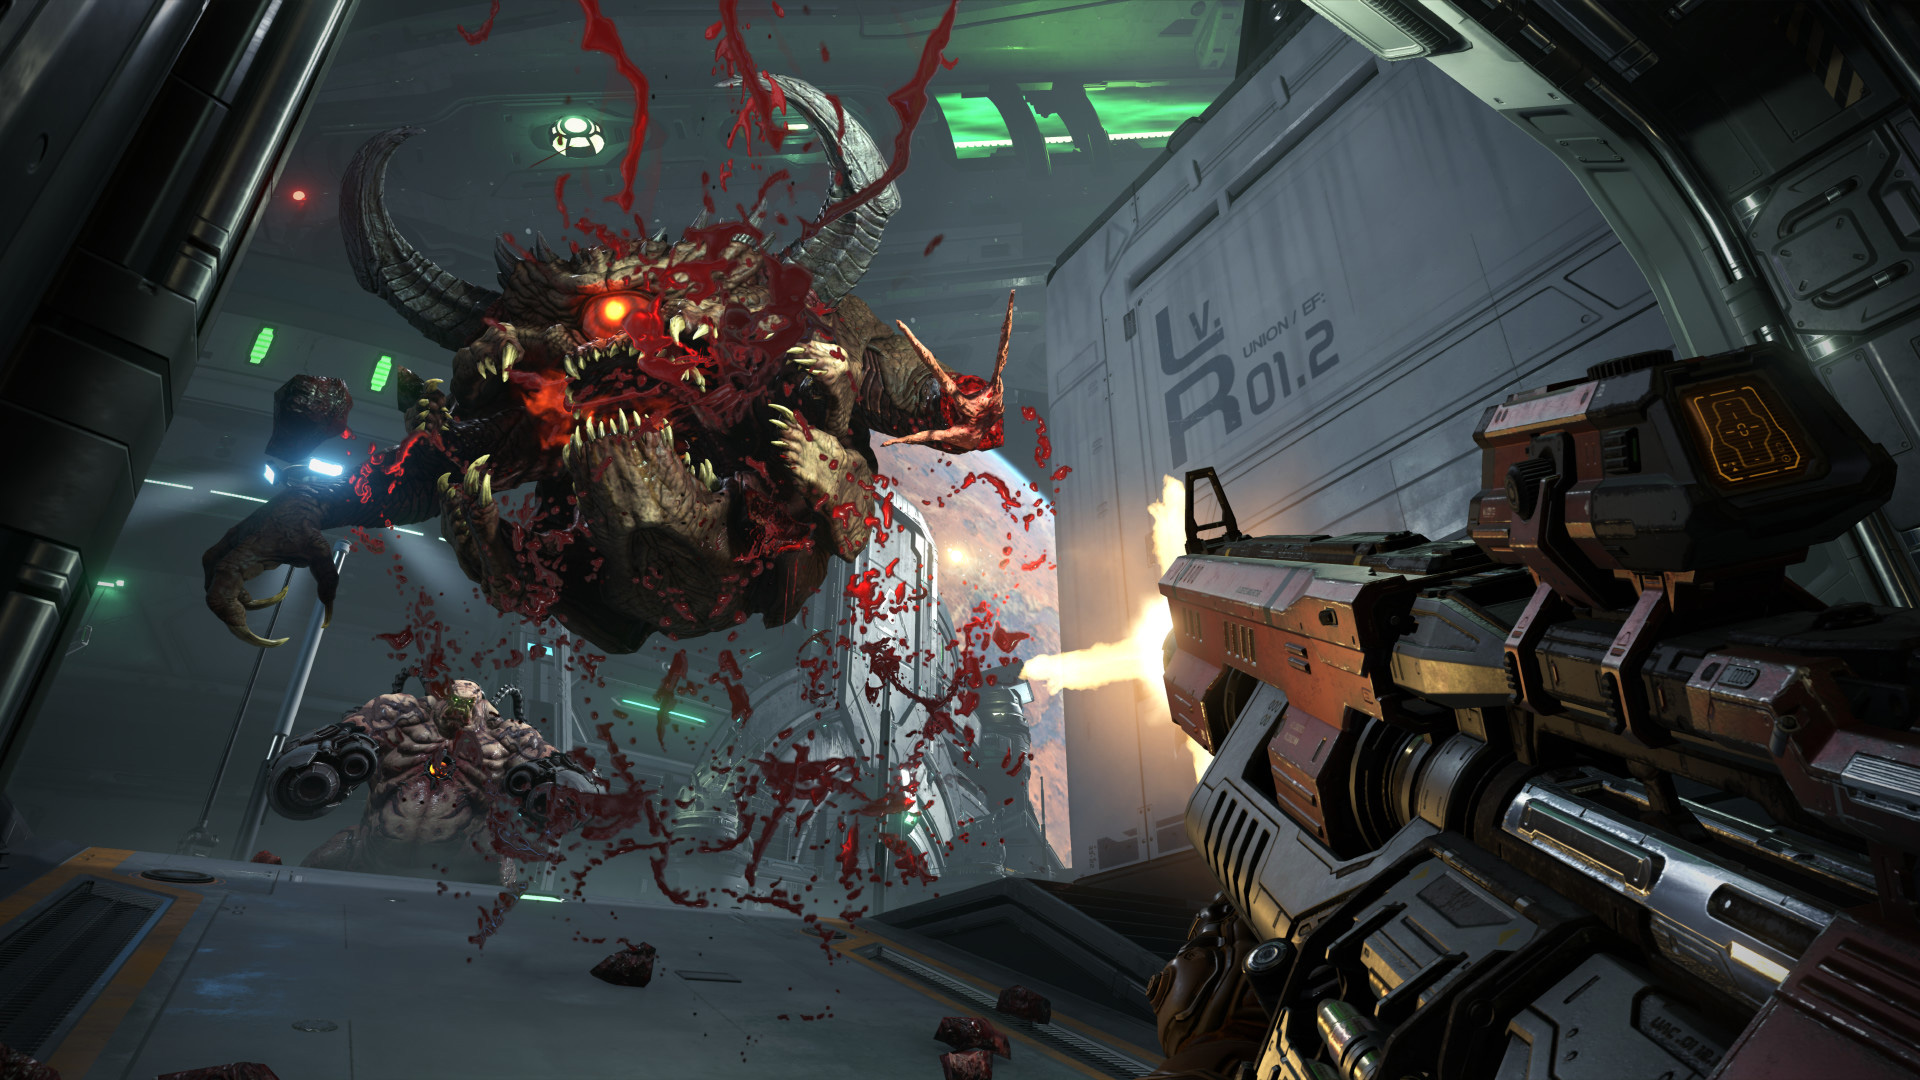 Which first-person shooter game becomes popular in online gaming world?